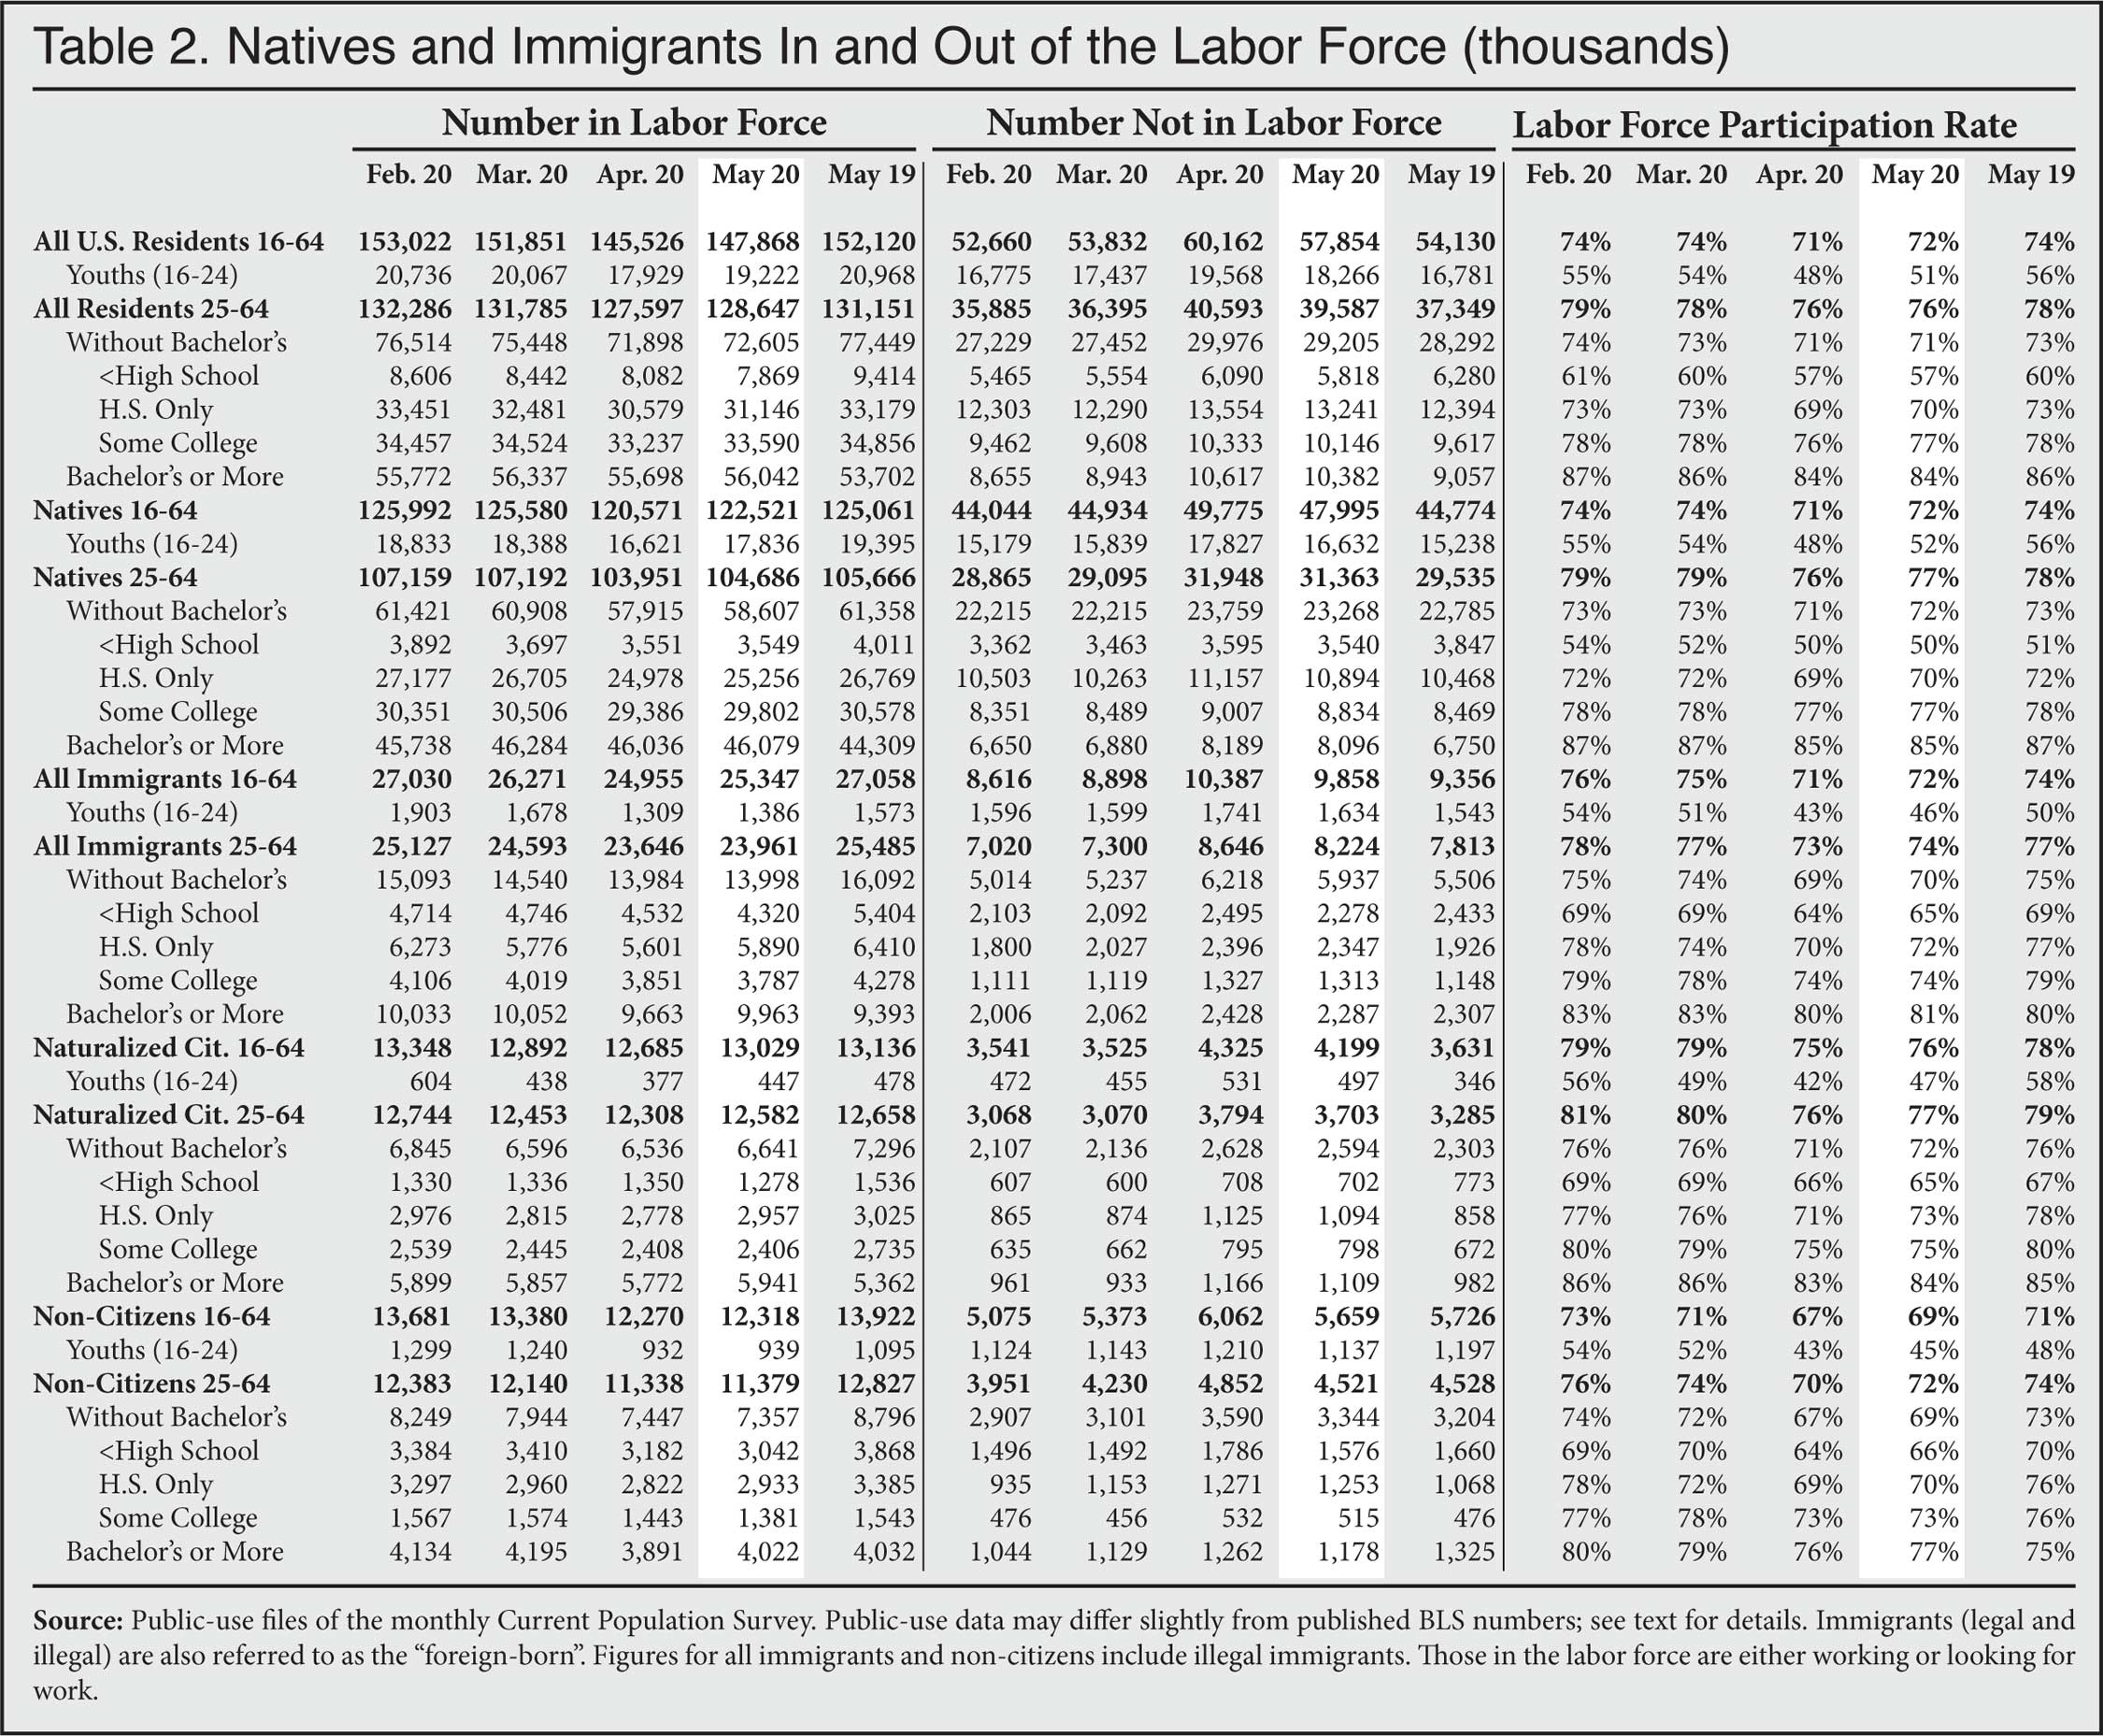 Table: Natives and Immigrants In and Out of the Labor Force